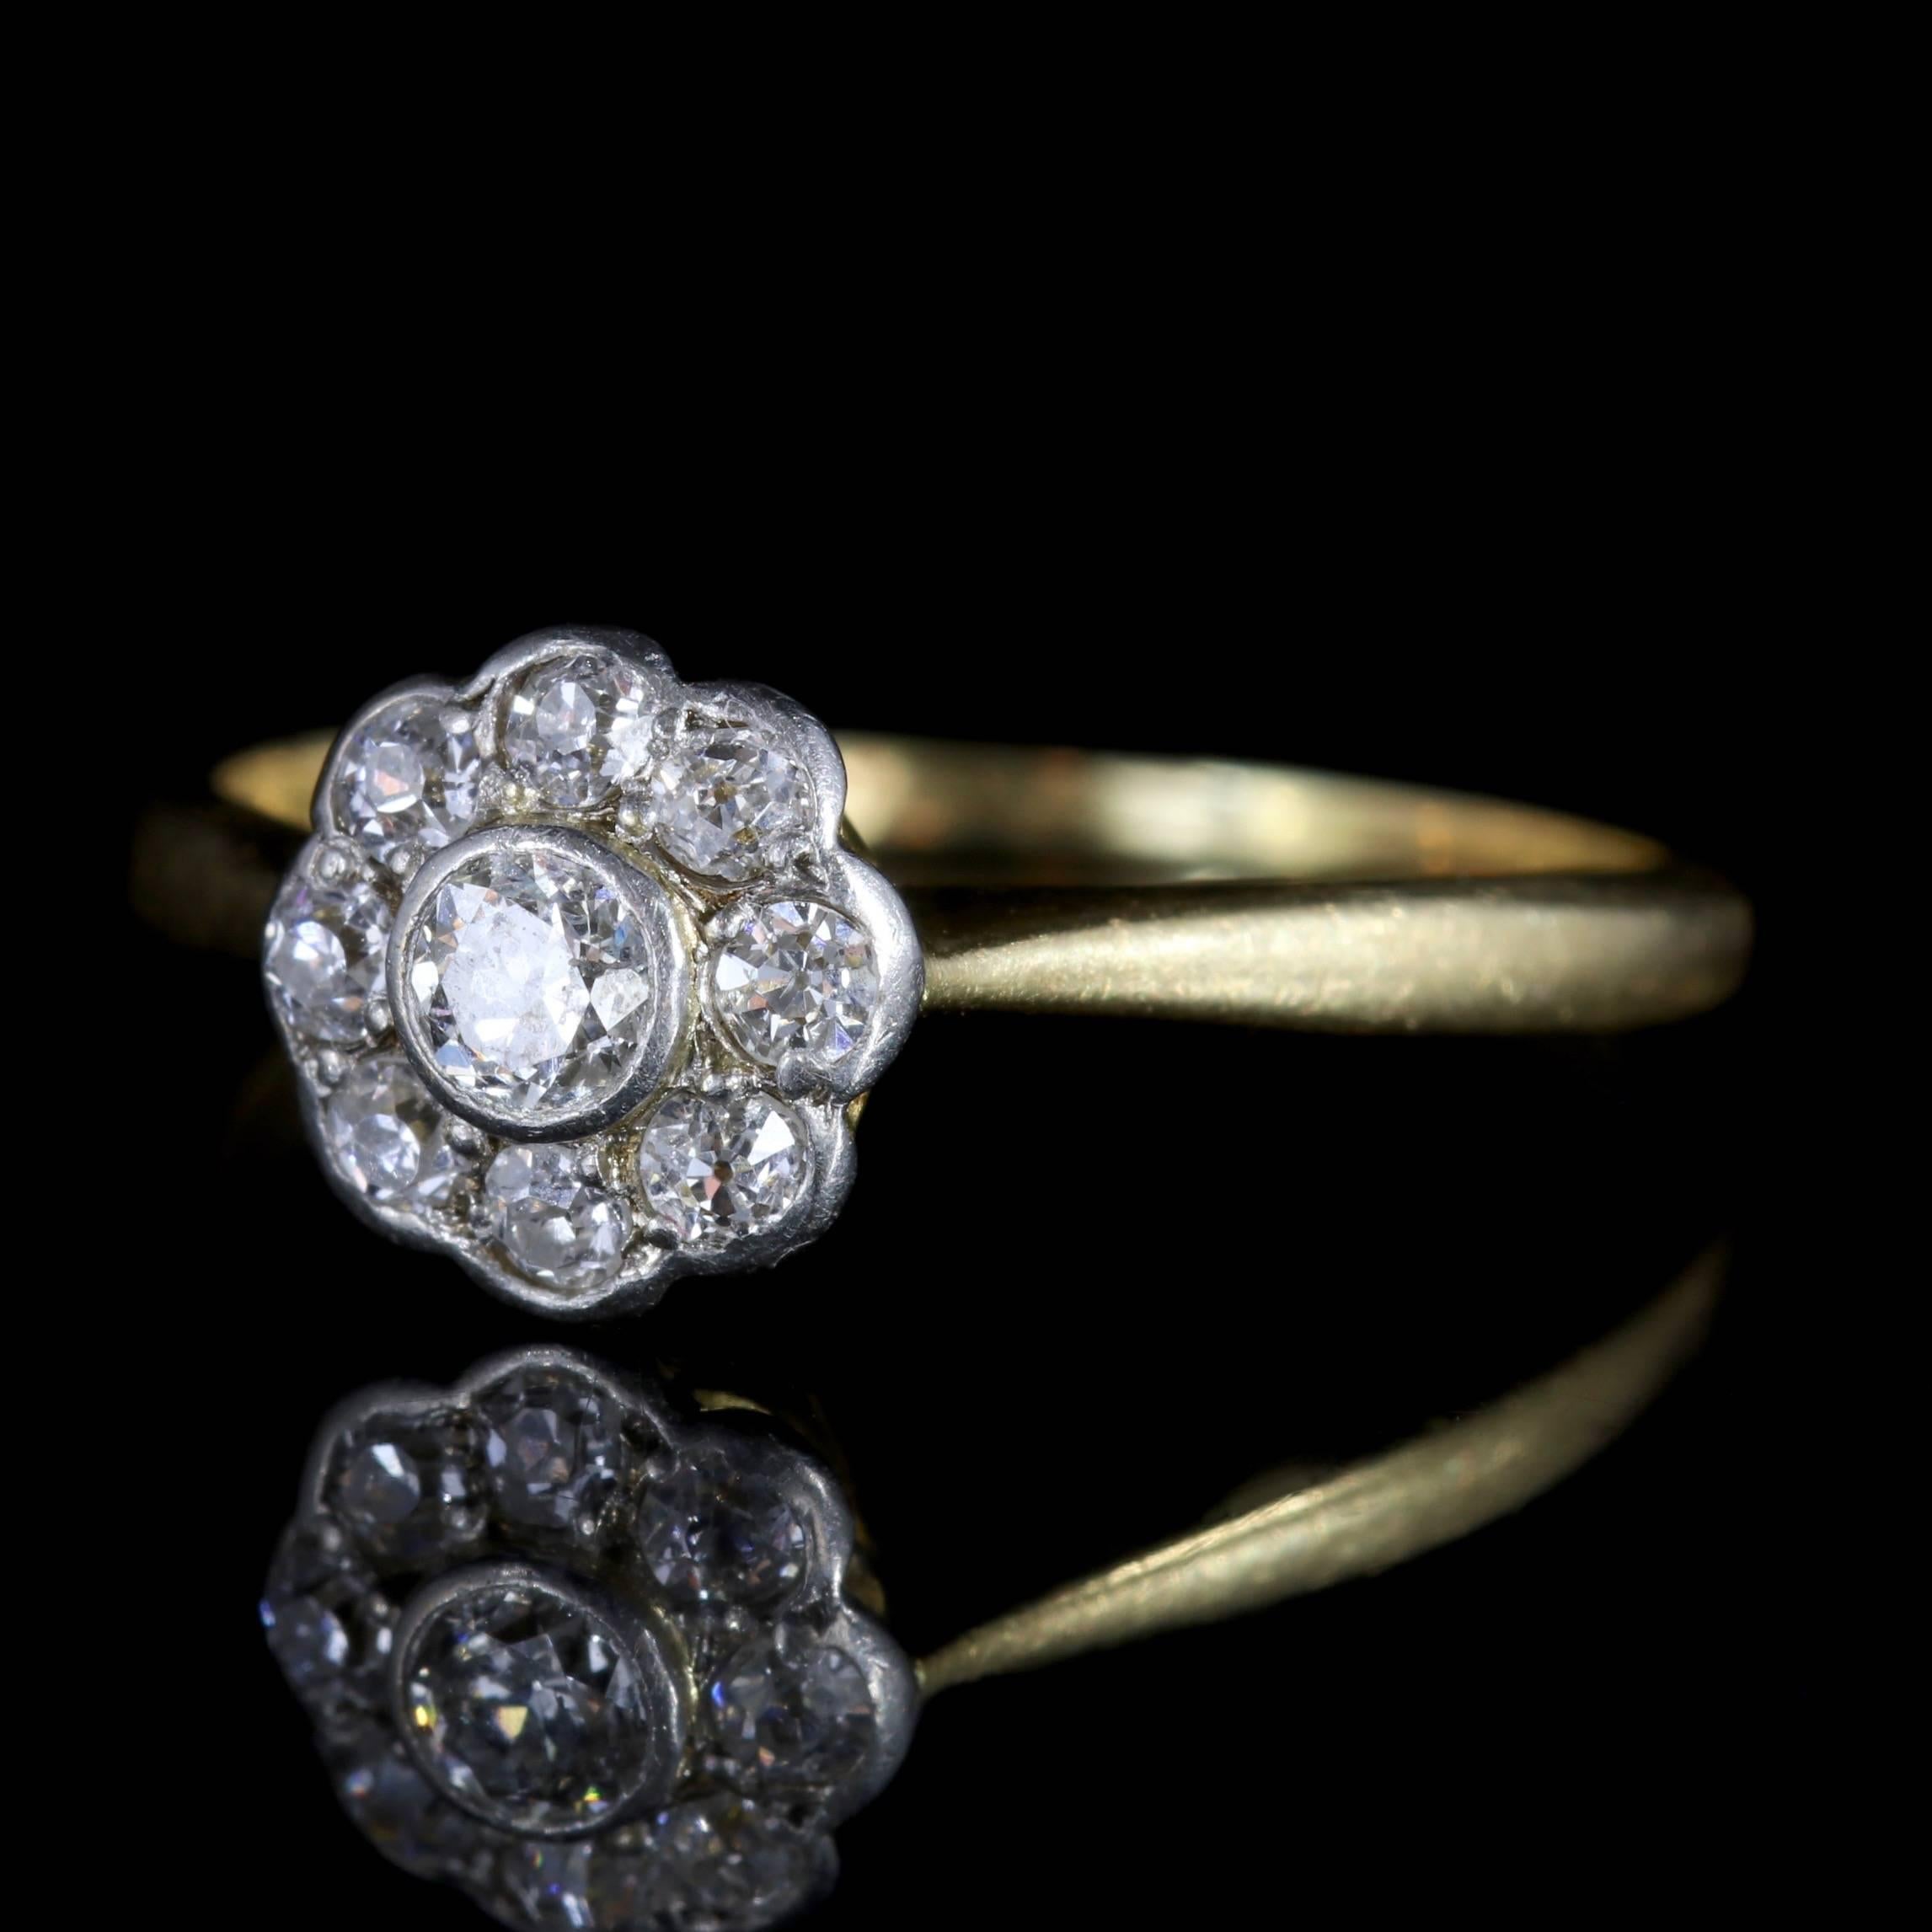 This stunning antique 18ct Gold, Diamond cluster ring is Edwardian Circa 1910. 

The beautiful flower shaped face is set with a 0.10ct old cut Diamond in the centre with 0.05ct Diamonds chasing around the gallery.

Diamond is the hardest mineral on